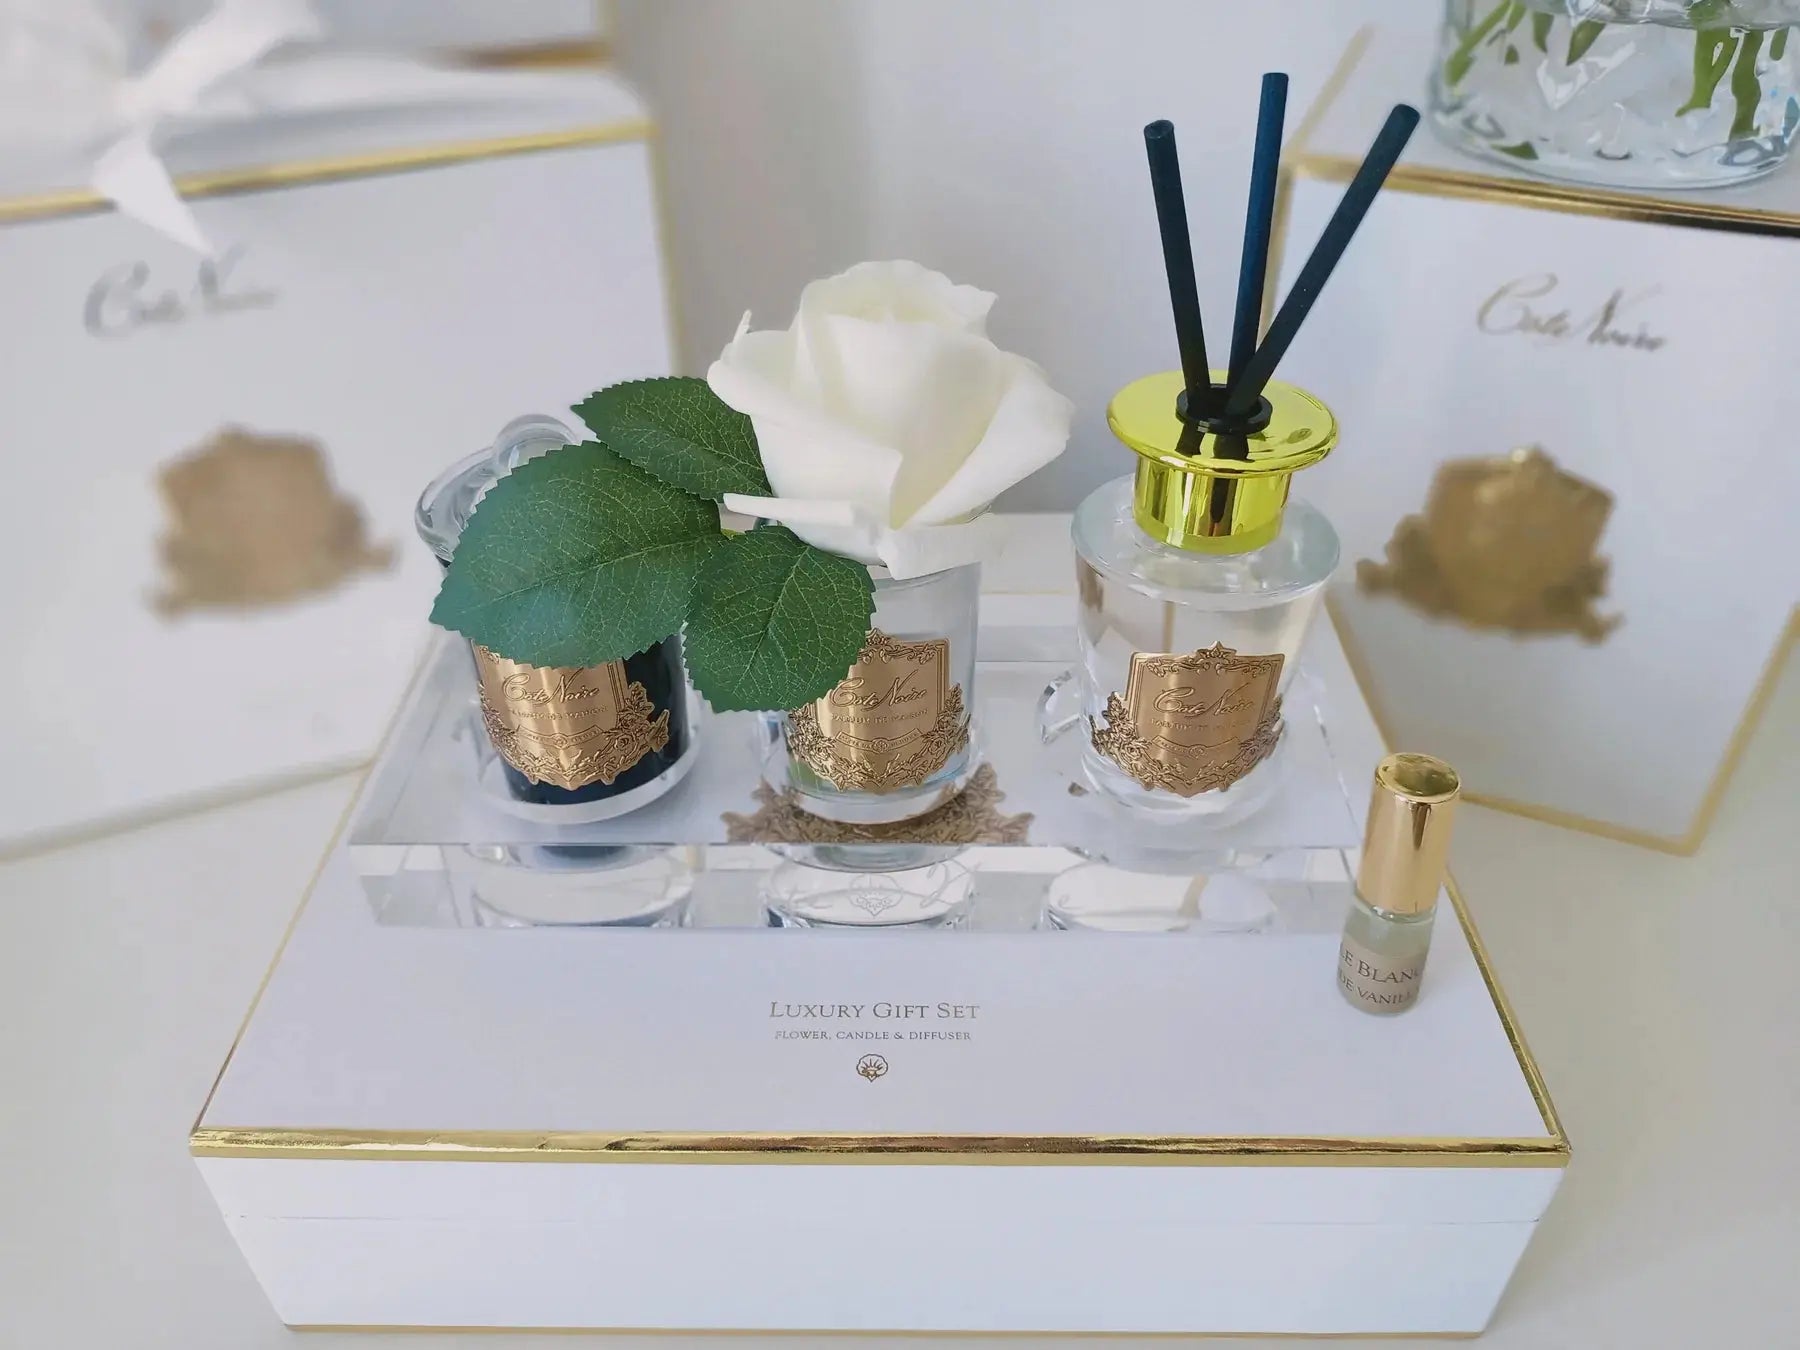 The image features a luxurious Cote Noire gift set displayed on a white box with gold trim. The set includes a clear glass diffuser with a gold lid and black reeds, and two smaller glass containers, each holding a perfumed white rose and labeled with gold text. A single bottle of perfume with a gold cap is also part of the set. The elegant presentation is enhanced by a clear acrylic tray beneath the items and a matching gift box in the background.